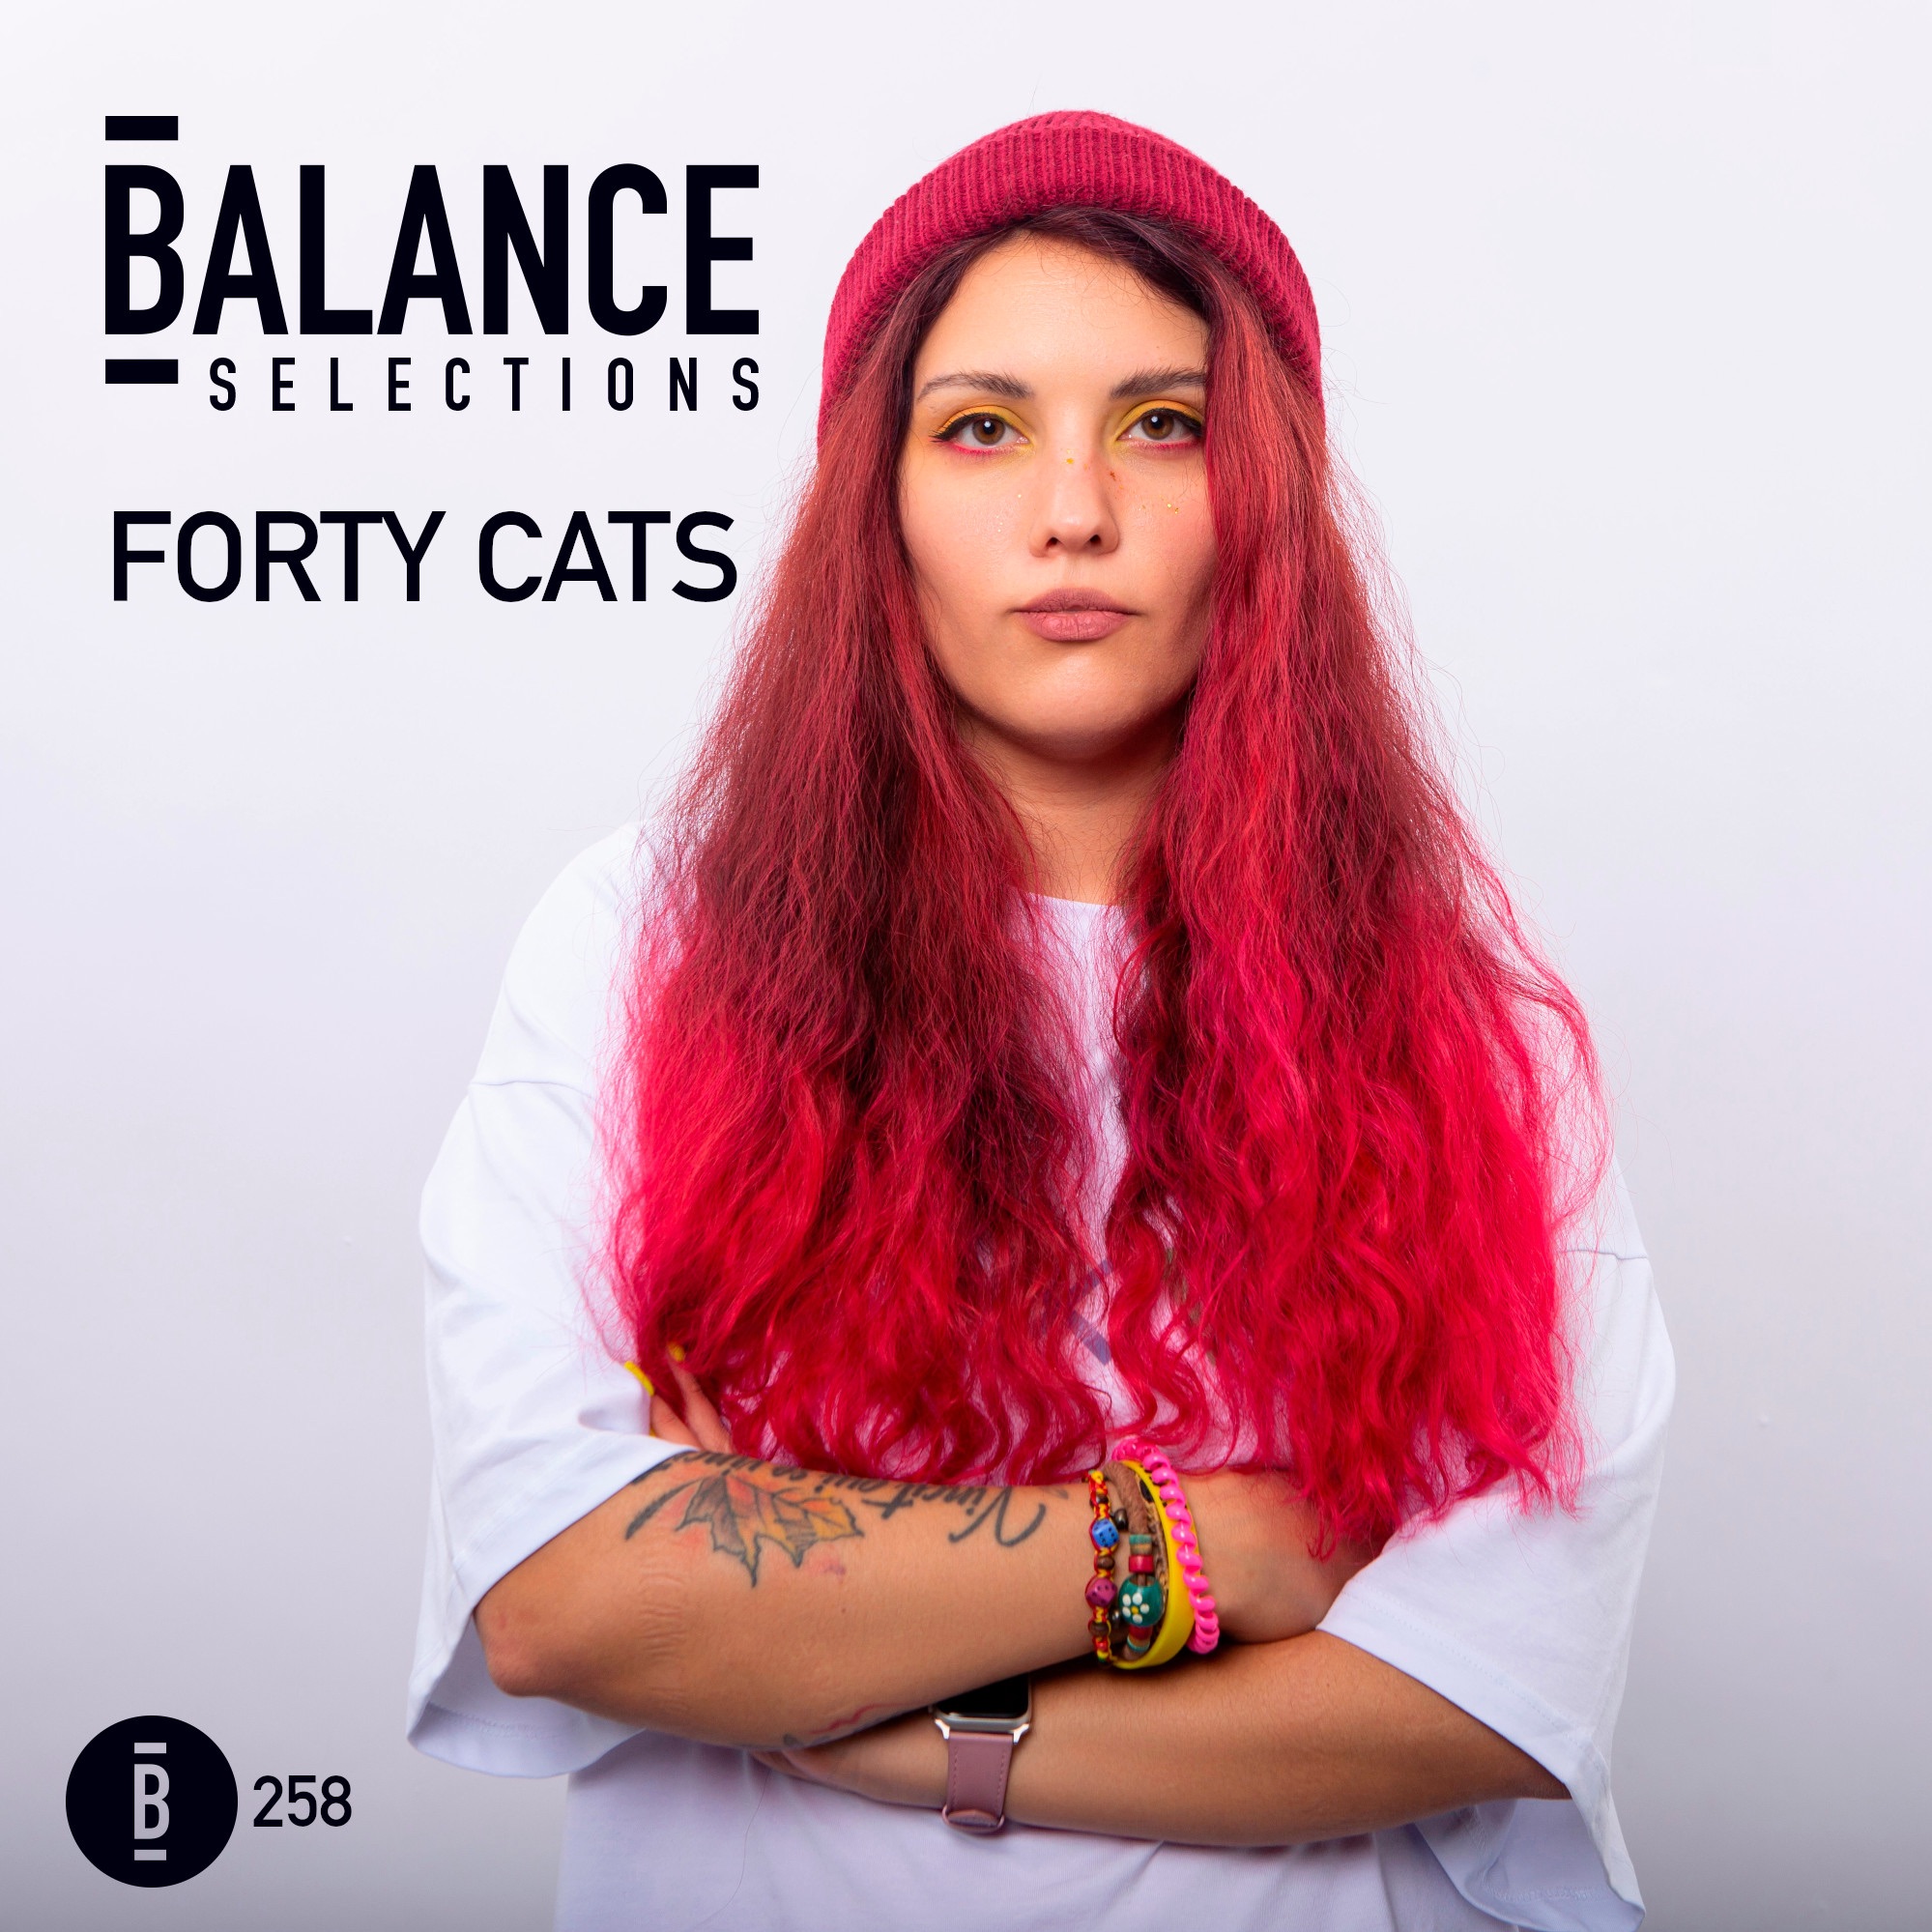 Downloaden! Balance Selections 258: Forty Cats